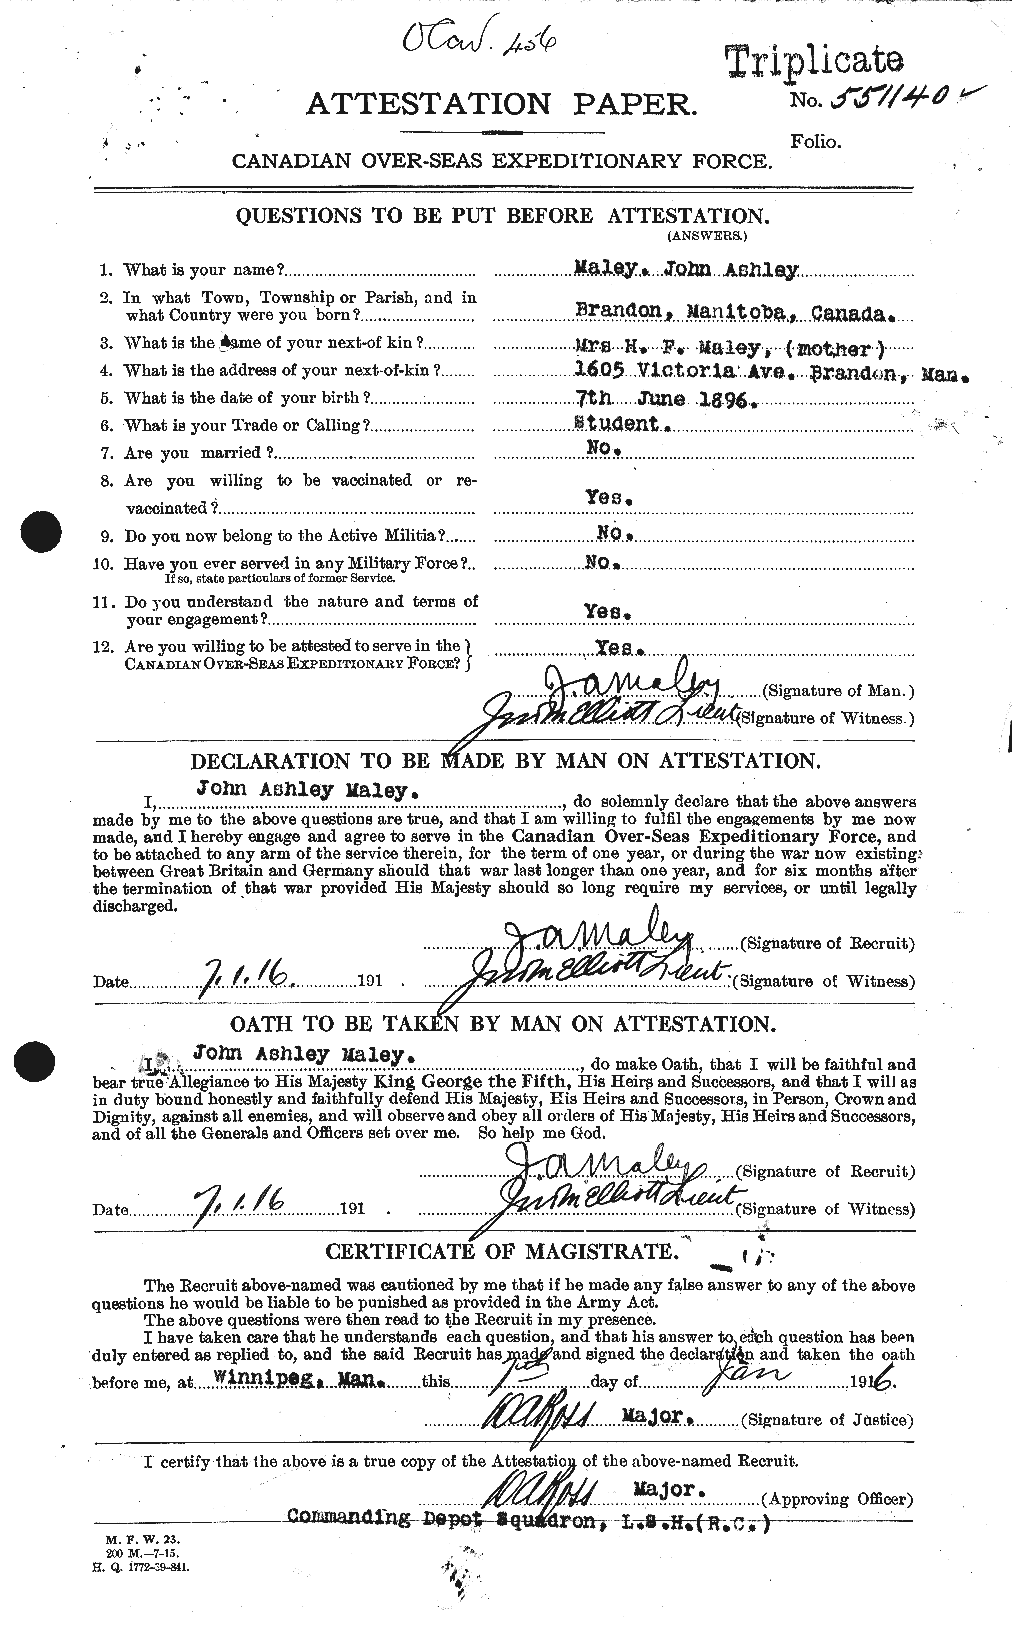 Personnel Records of the First World War - CEF 477384a